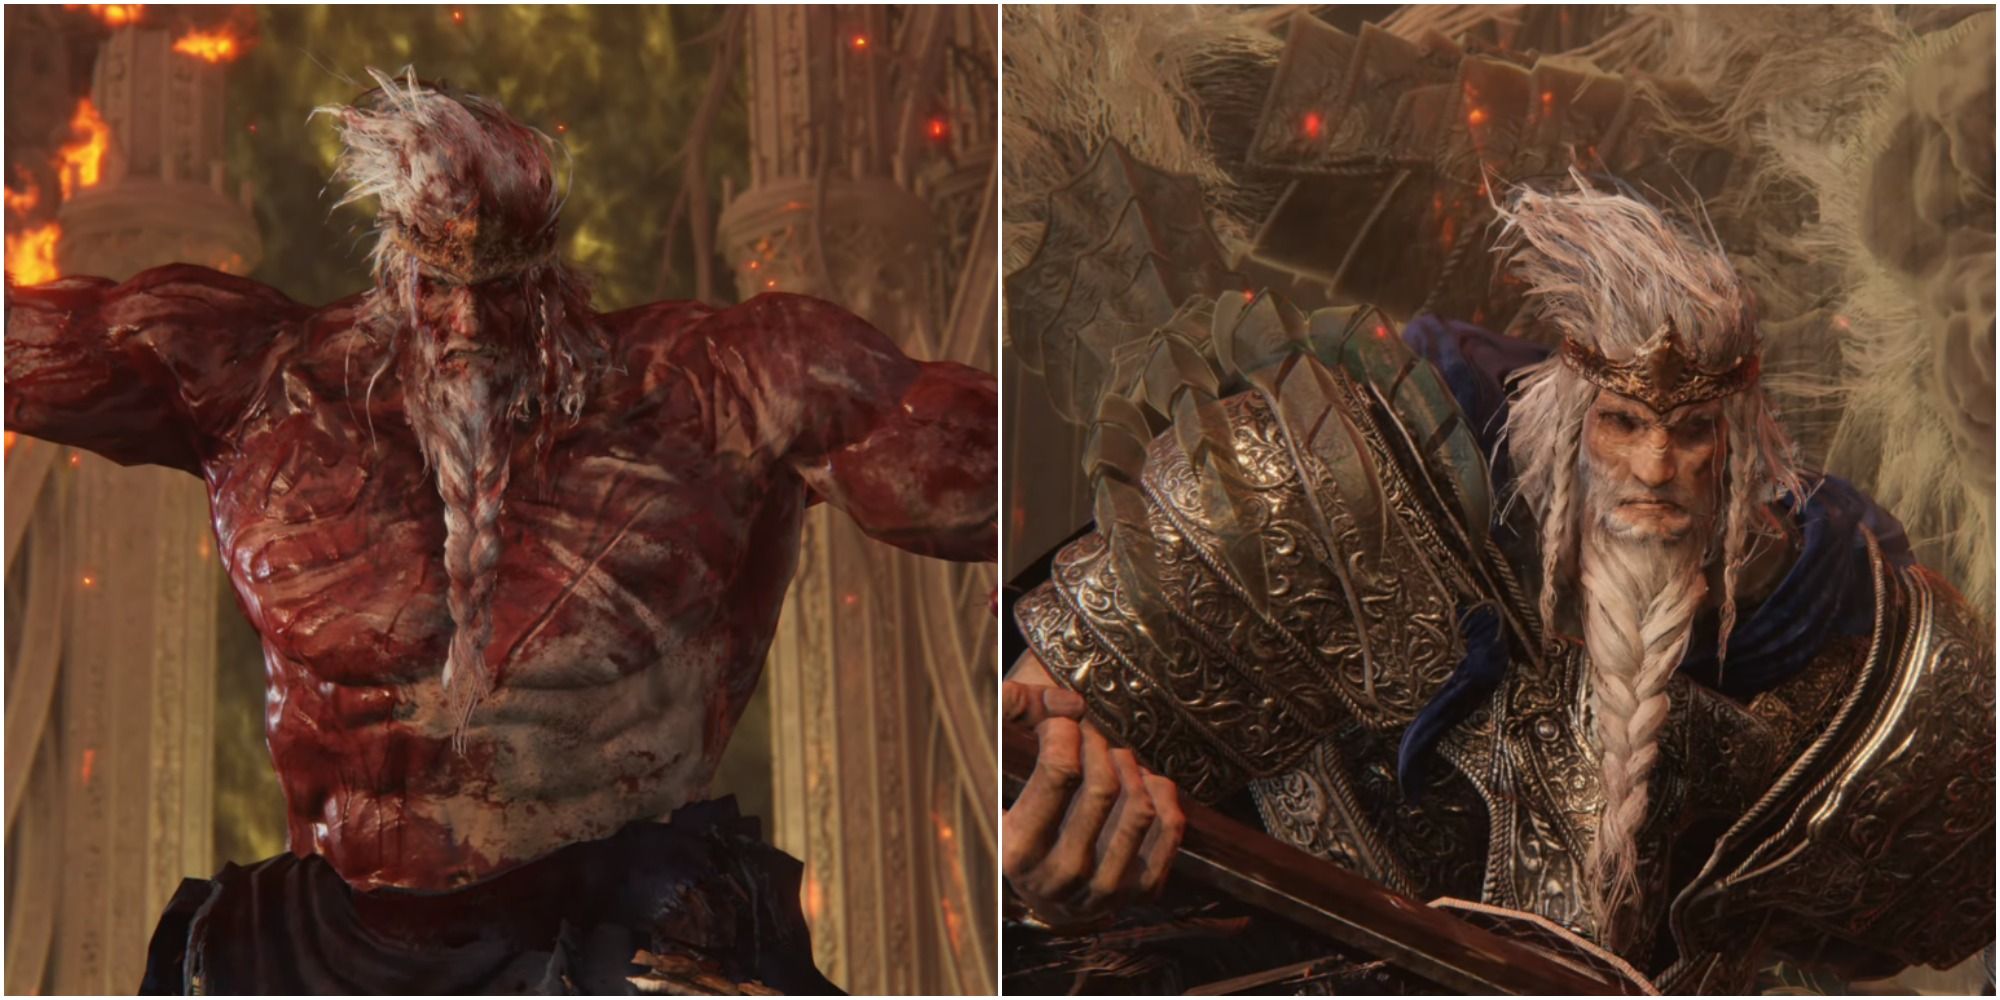 Split images showing Godfrey, the first Elden Lord.